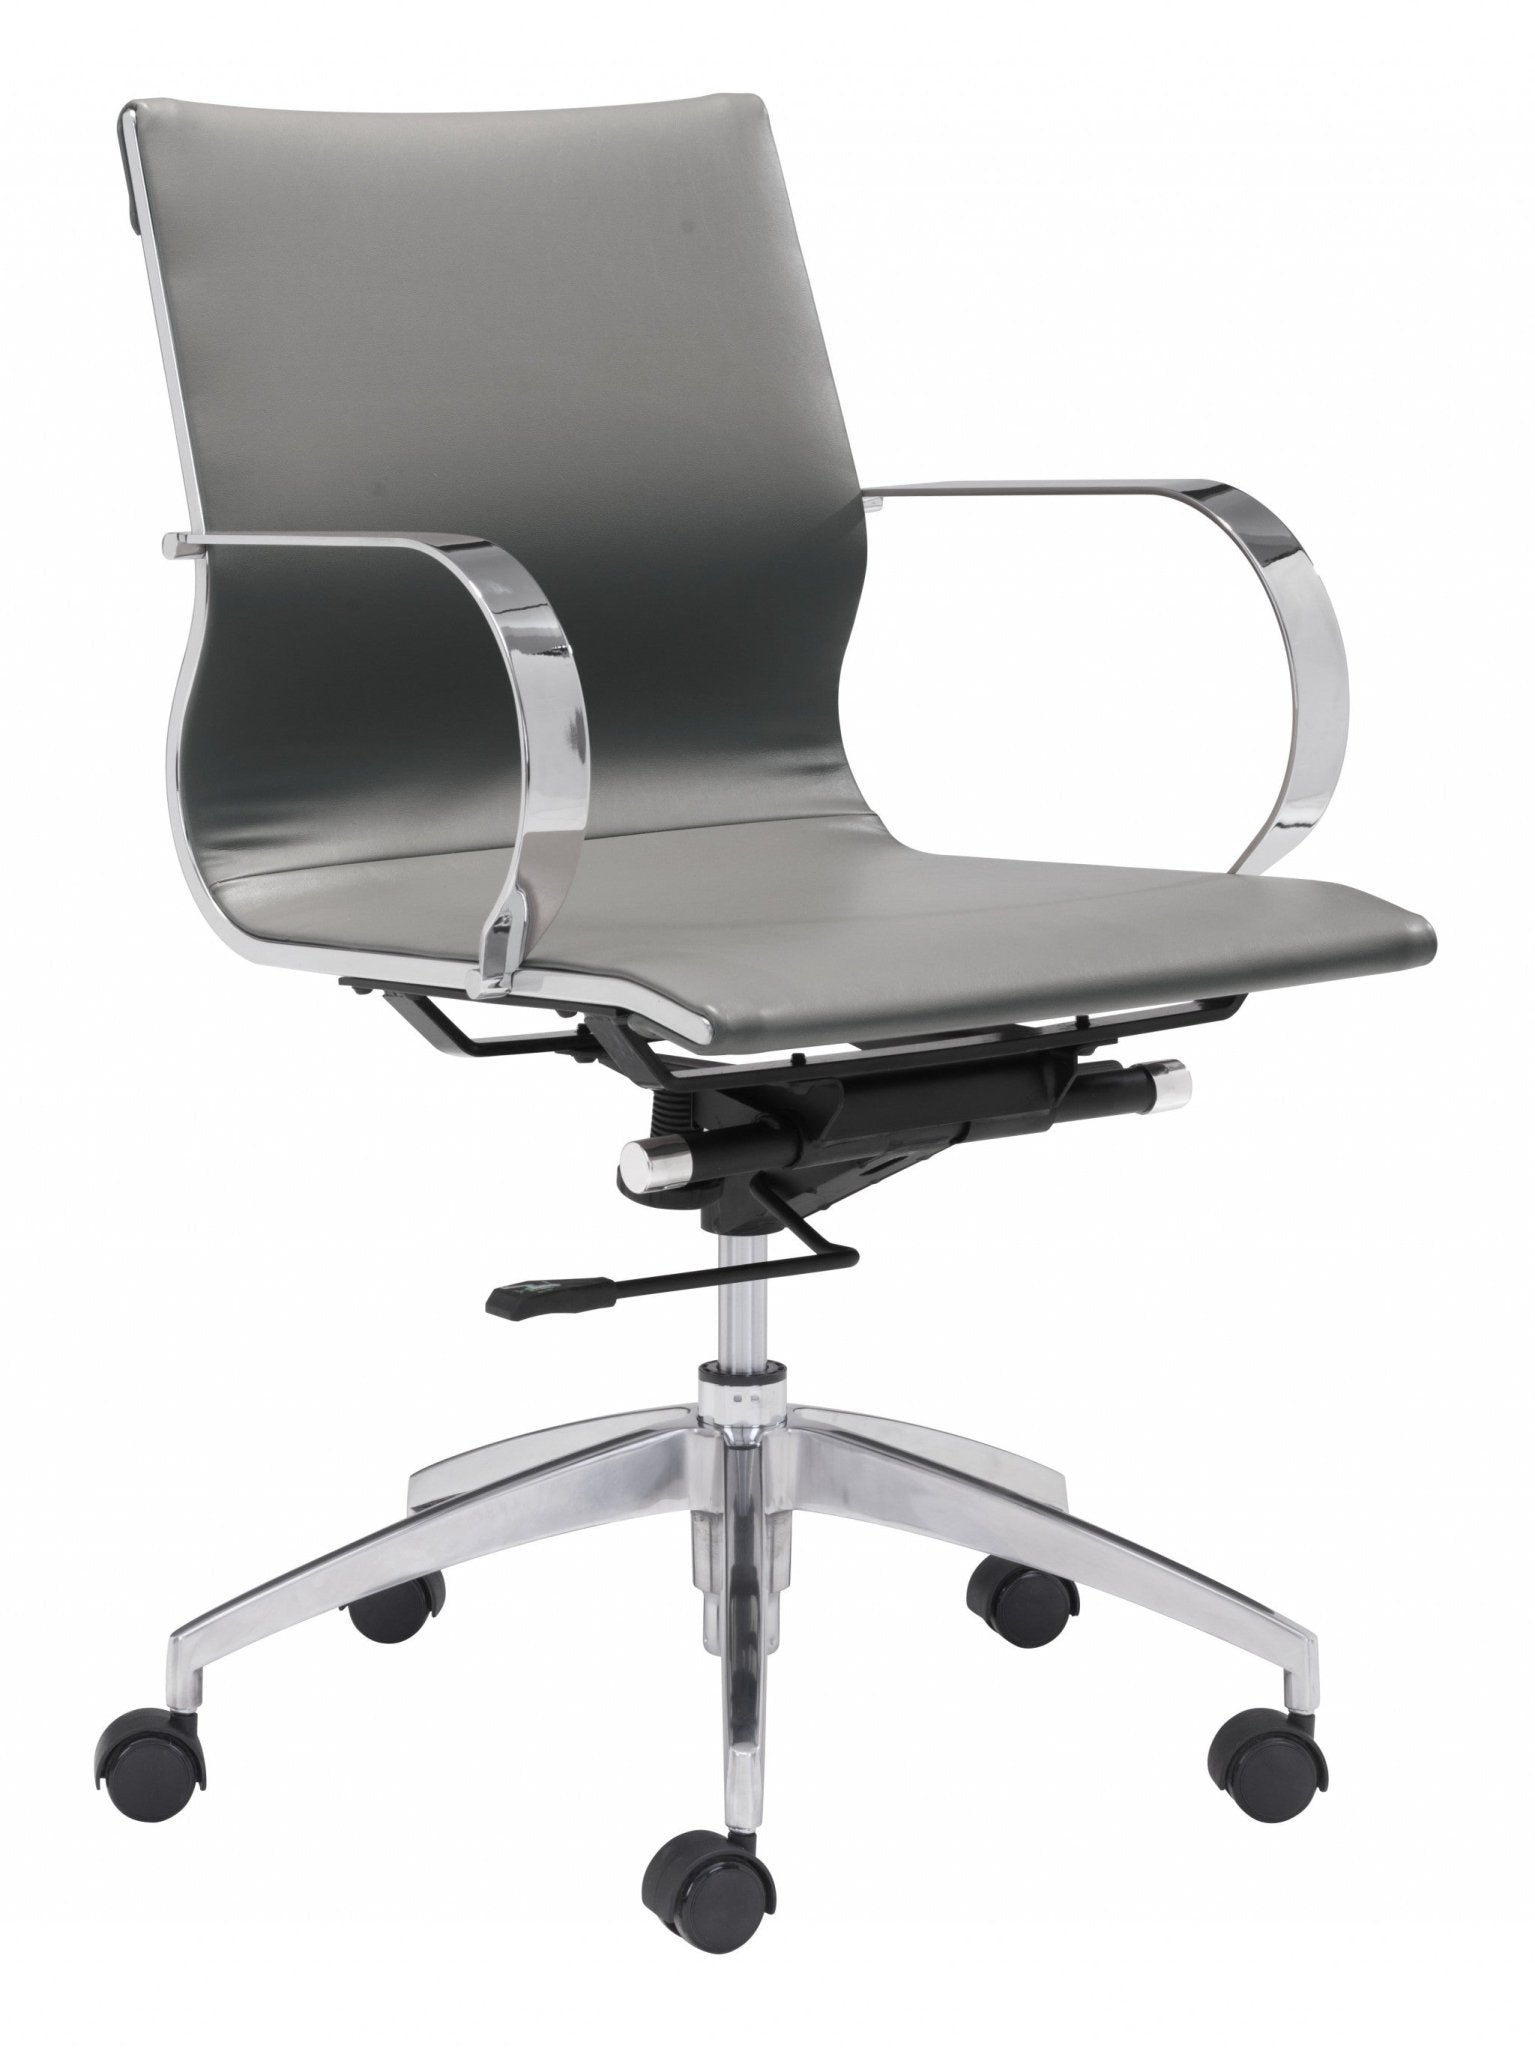 Gray-Faux-Leather-Seat-Swivel-Adjustable-Conference-Chair-Metal-Back-Steel-Frame-Office-Chairs